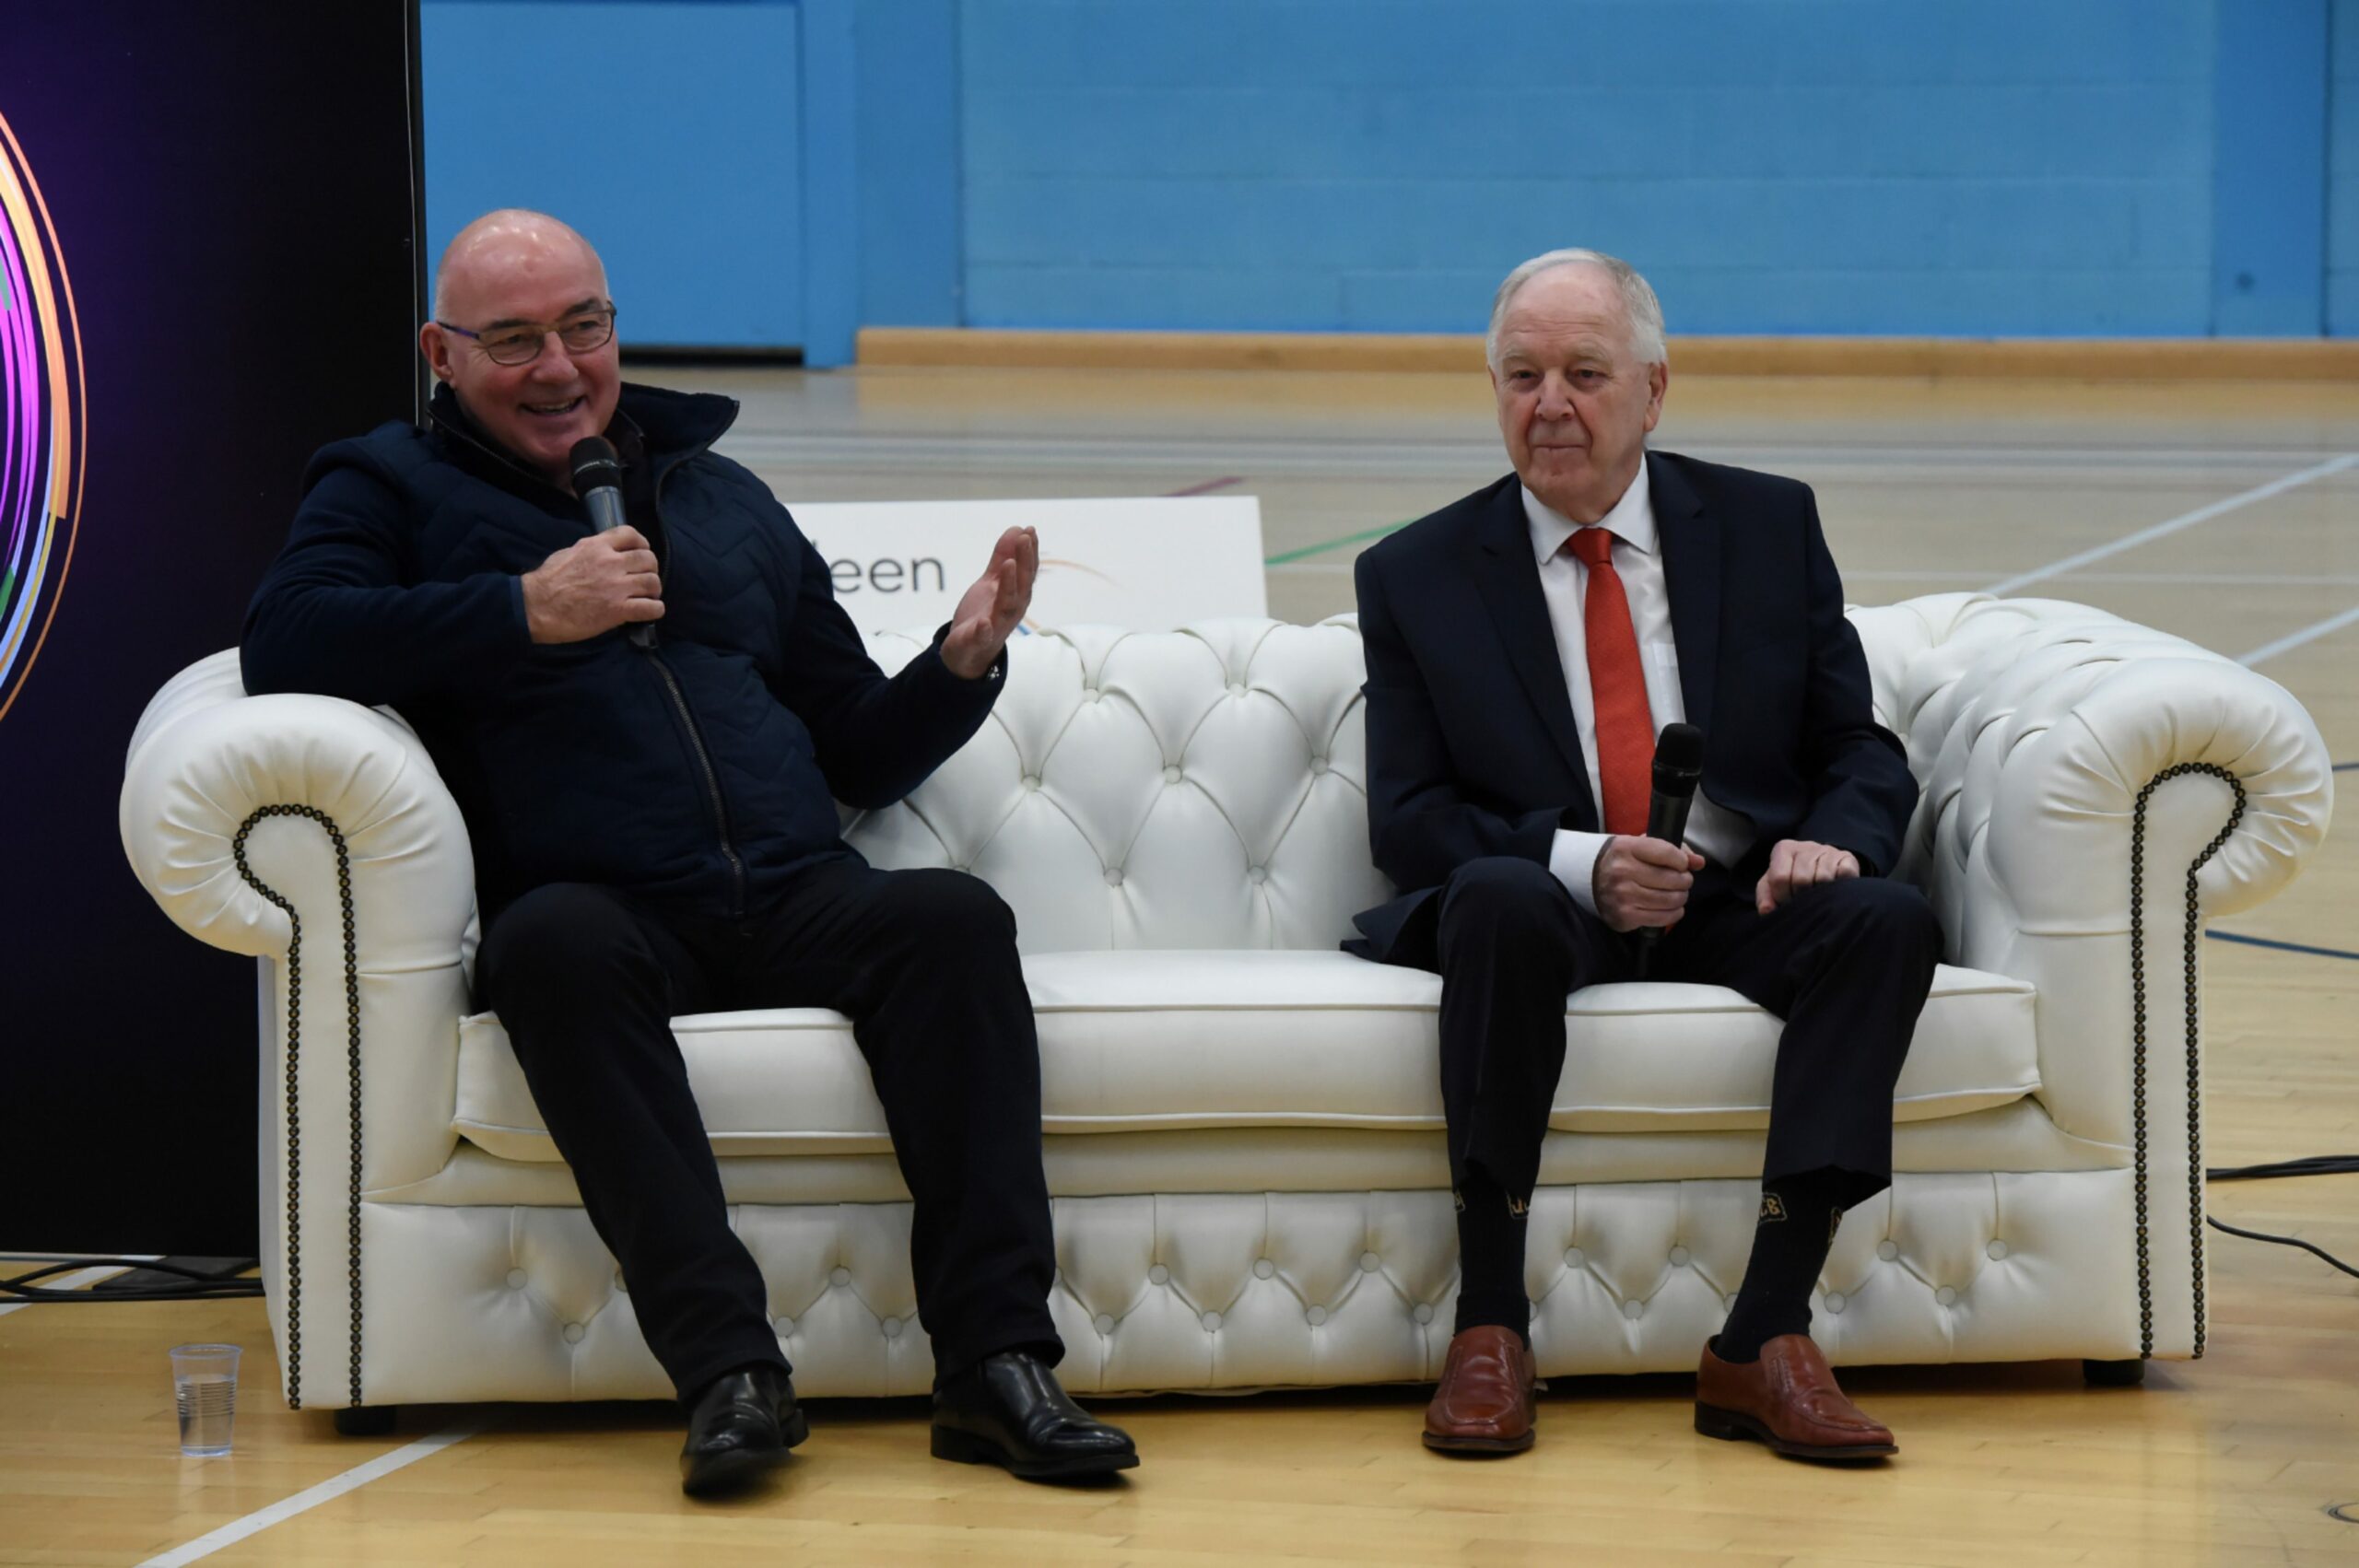 Willie Miller and Craig Brown on a white chesterfield sofa with microphones